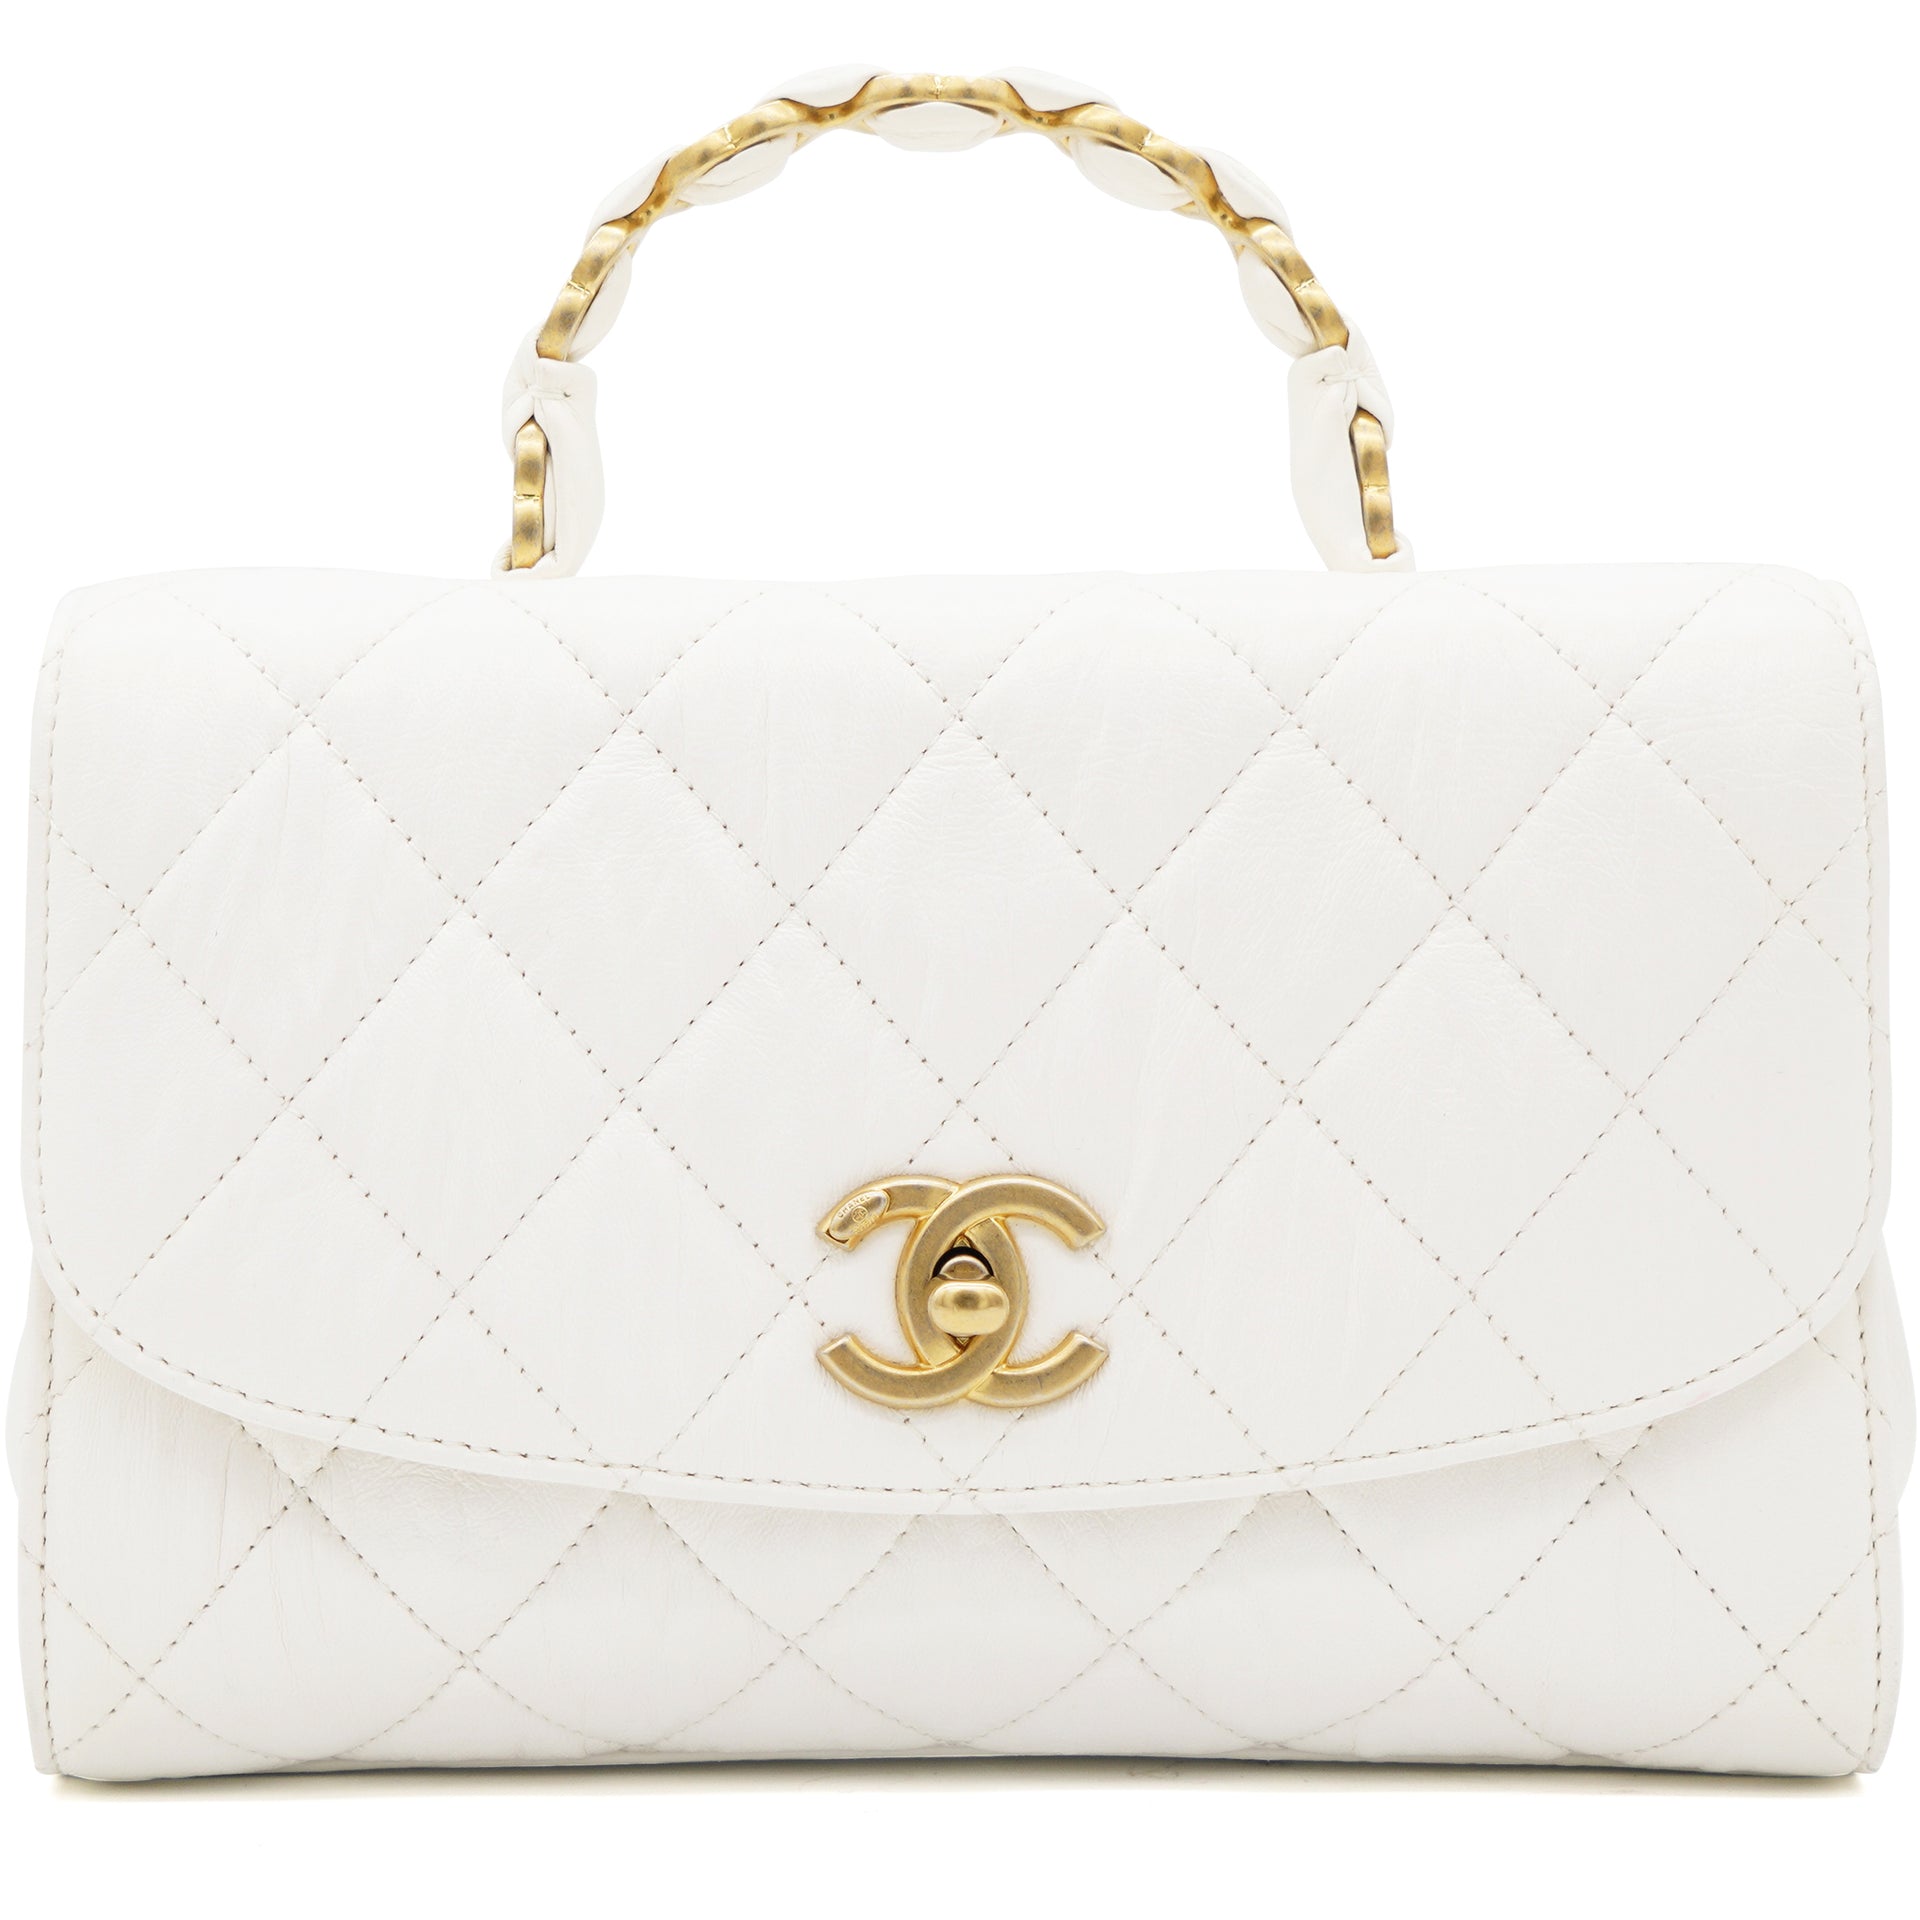 A Chanel White Quilted Leather Box Bag, 8 x 6 x 2 inches. for sale